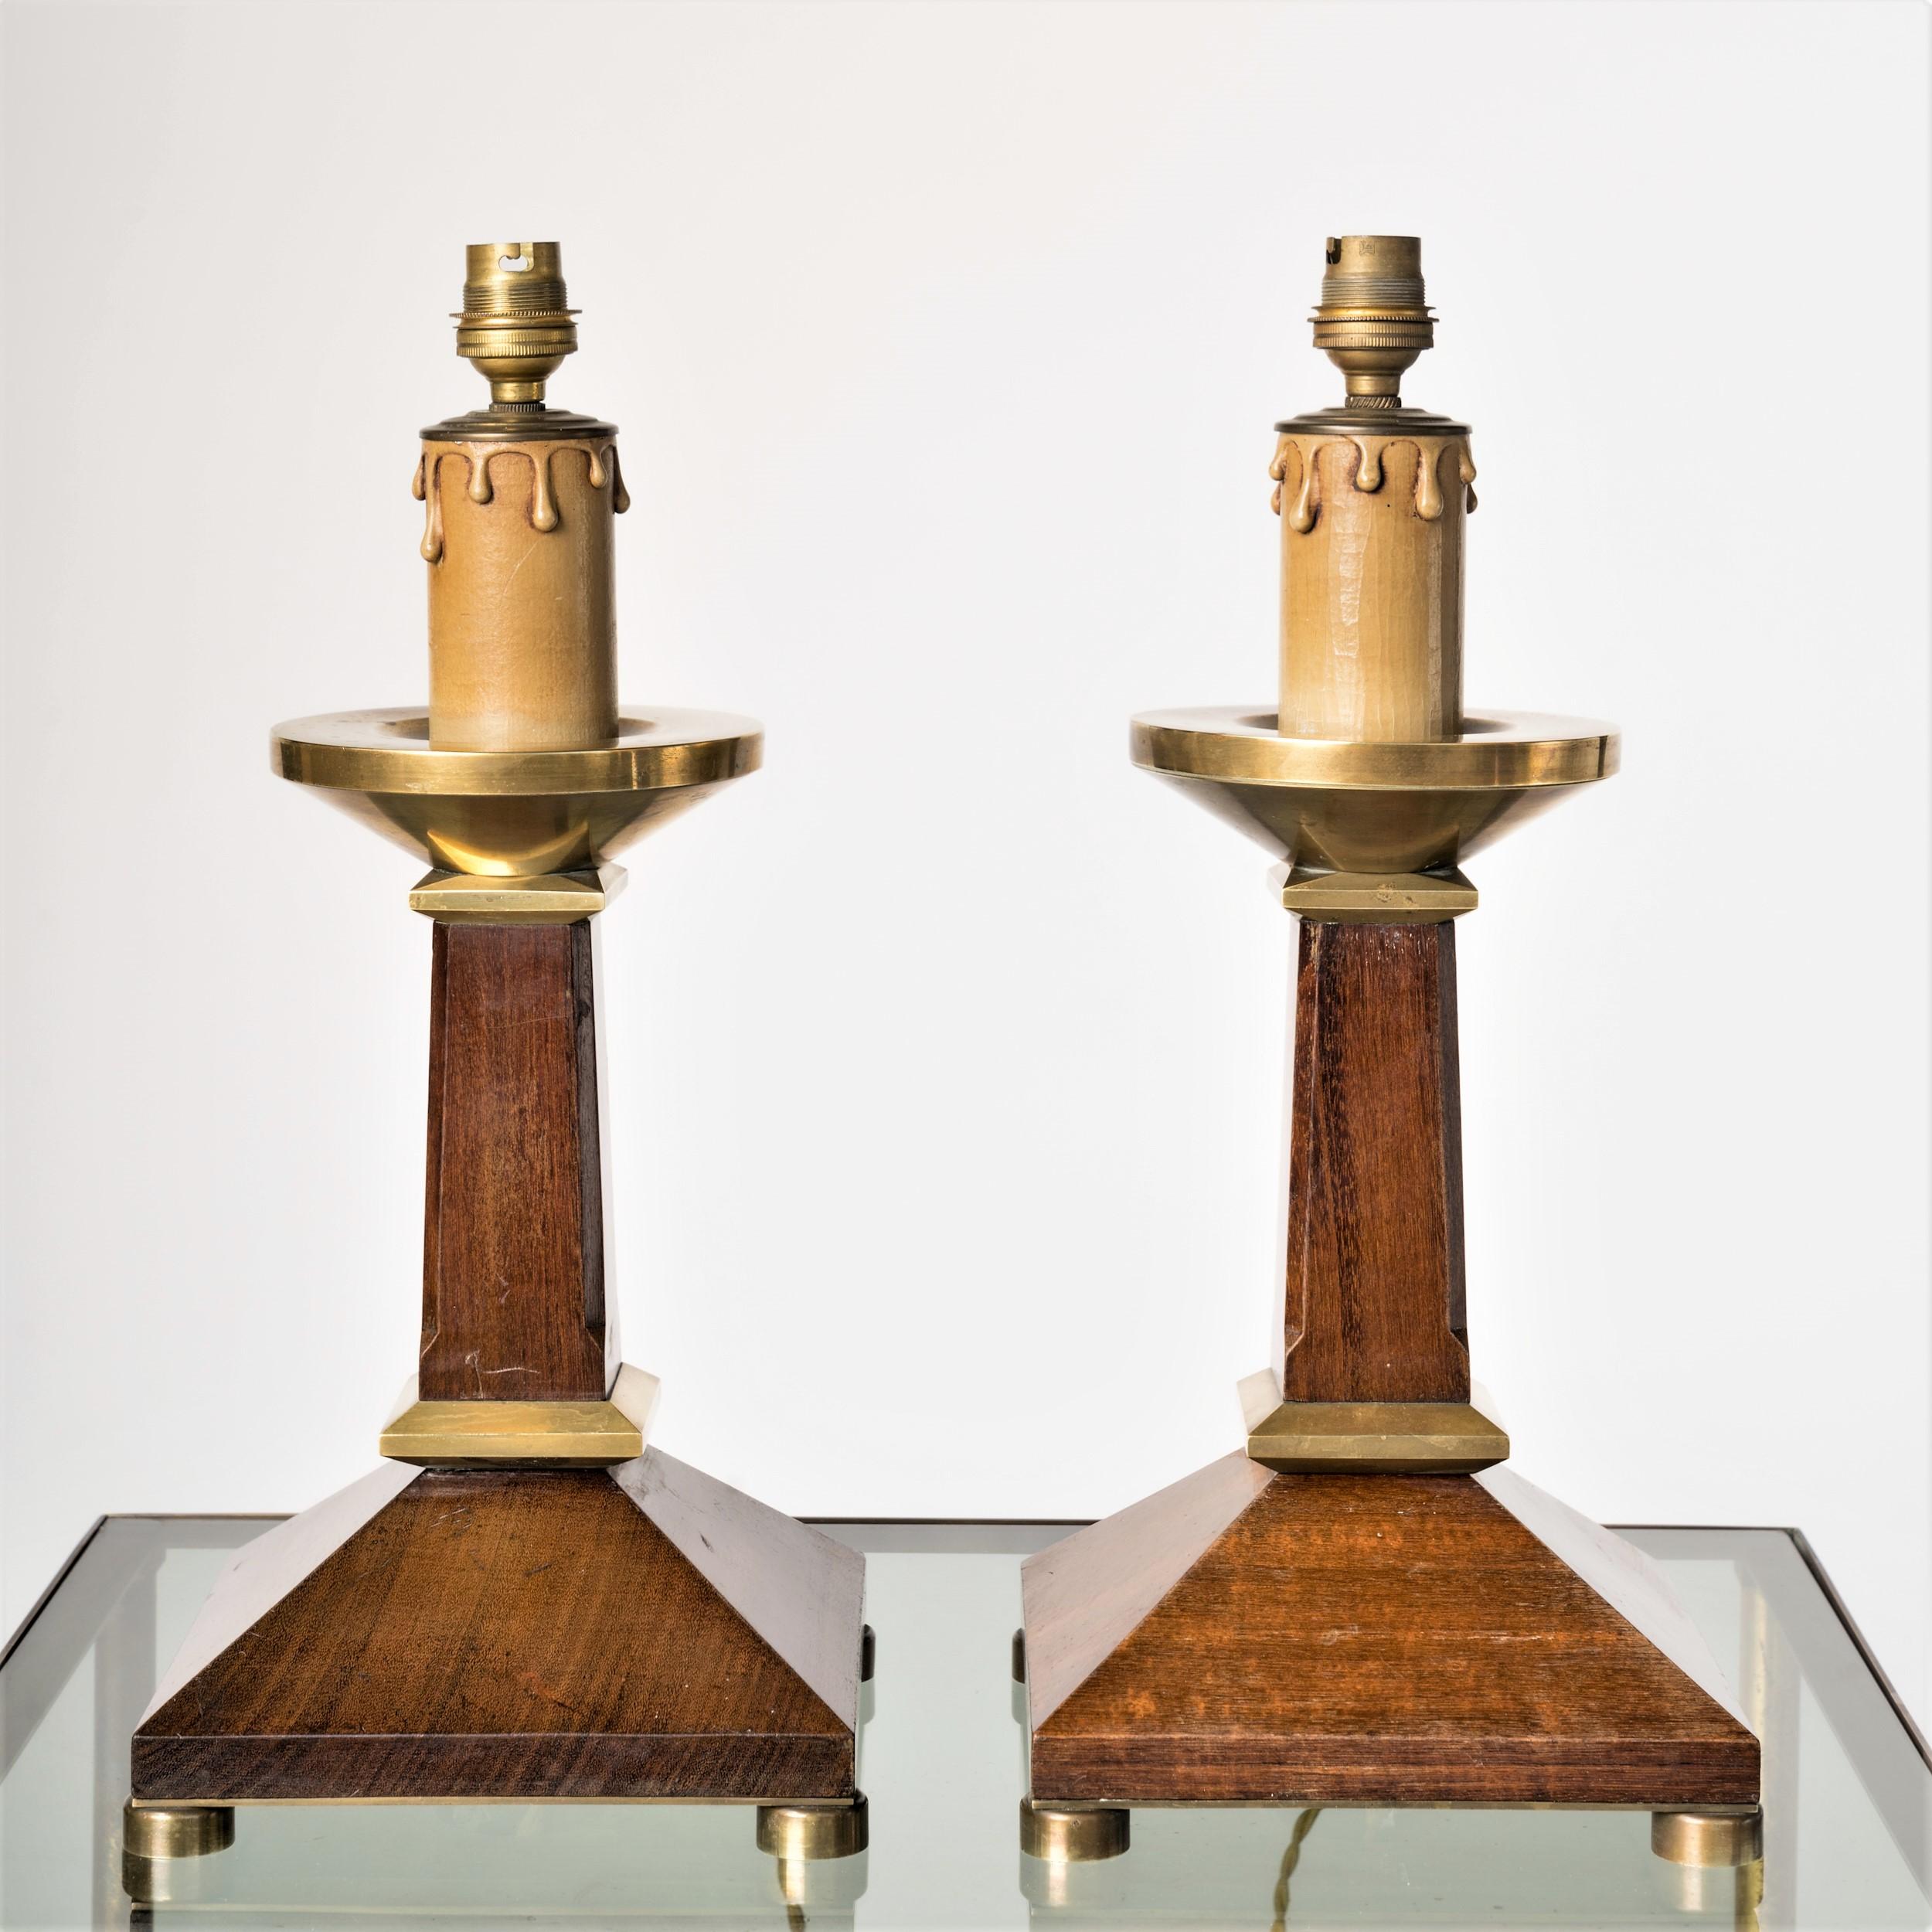 Elegant pair of neo classical table lamps. Mahogany and brass accents.  Faud candle socket decor.  Price includes rewiring for the US. Minor dent on one of the lamps as shown on pictures (on the back side). Minor scratches.
Else in fair vintage